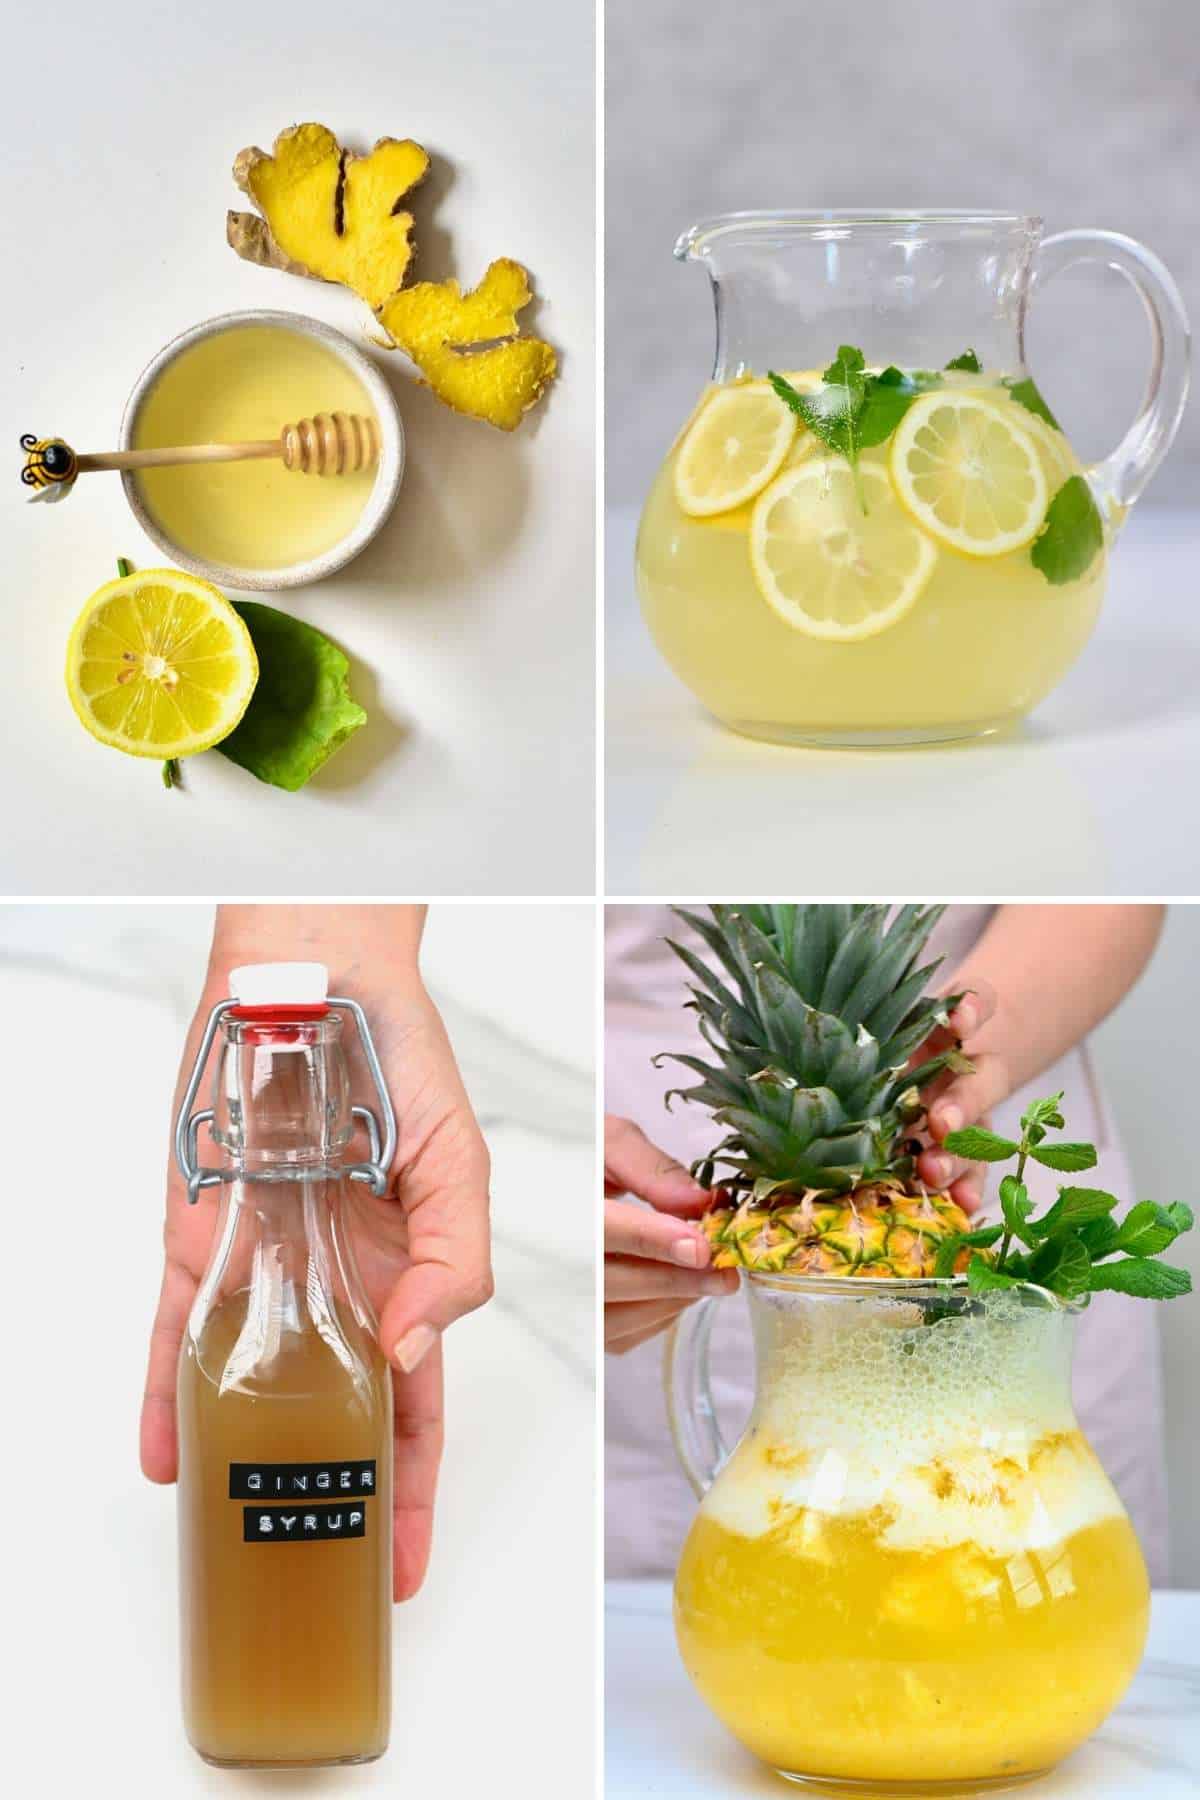 Other Ginger Drink Ideas